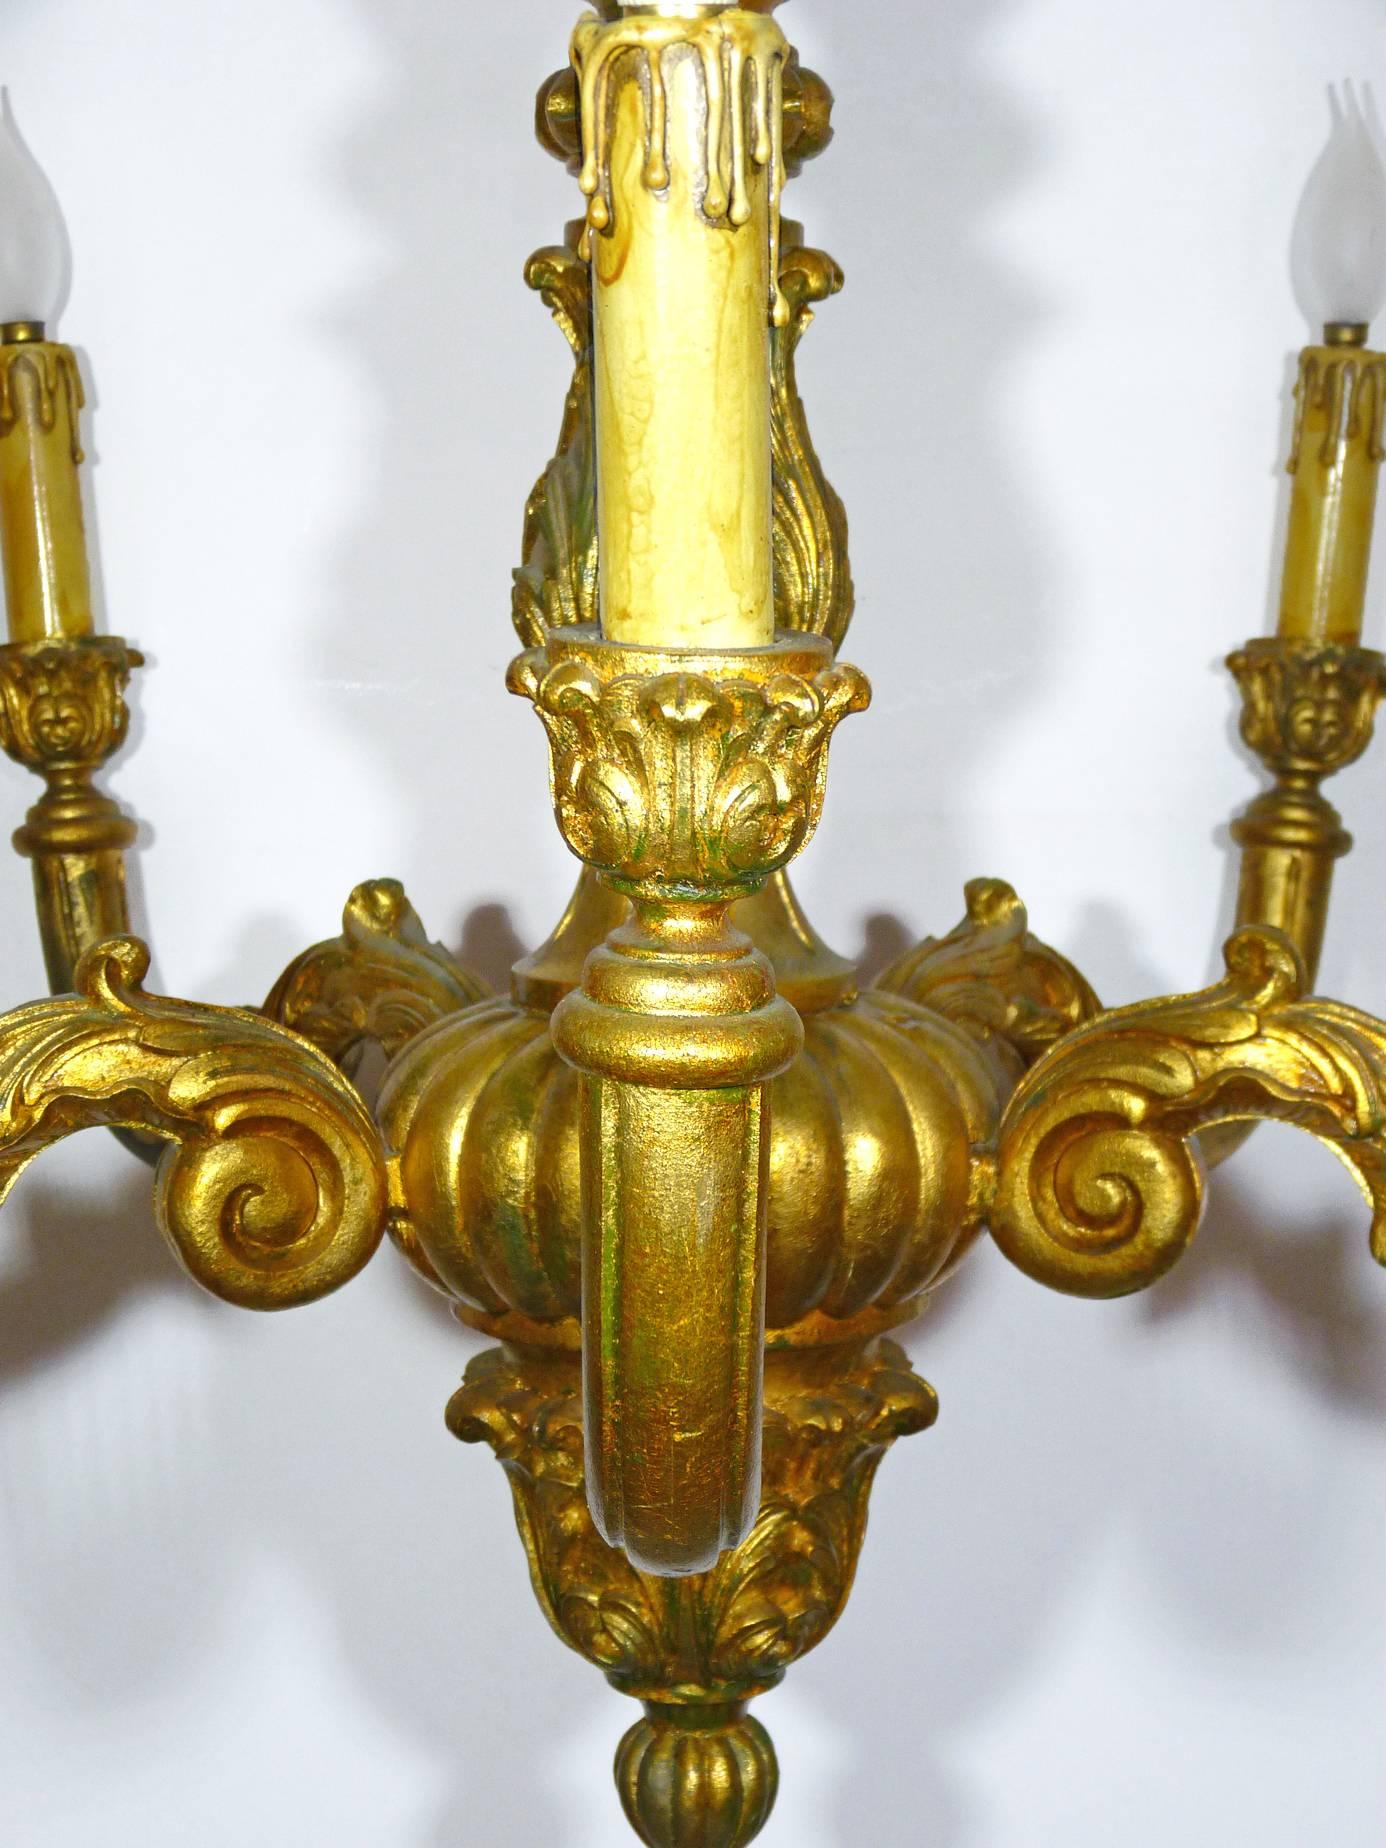 20th Century Large Neoclassic Wood Carved Gold Leaf Baroque Giltwood Five-Arm Chandelier